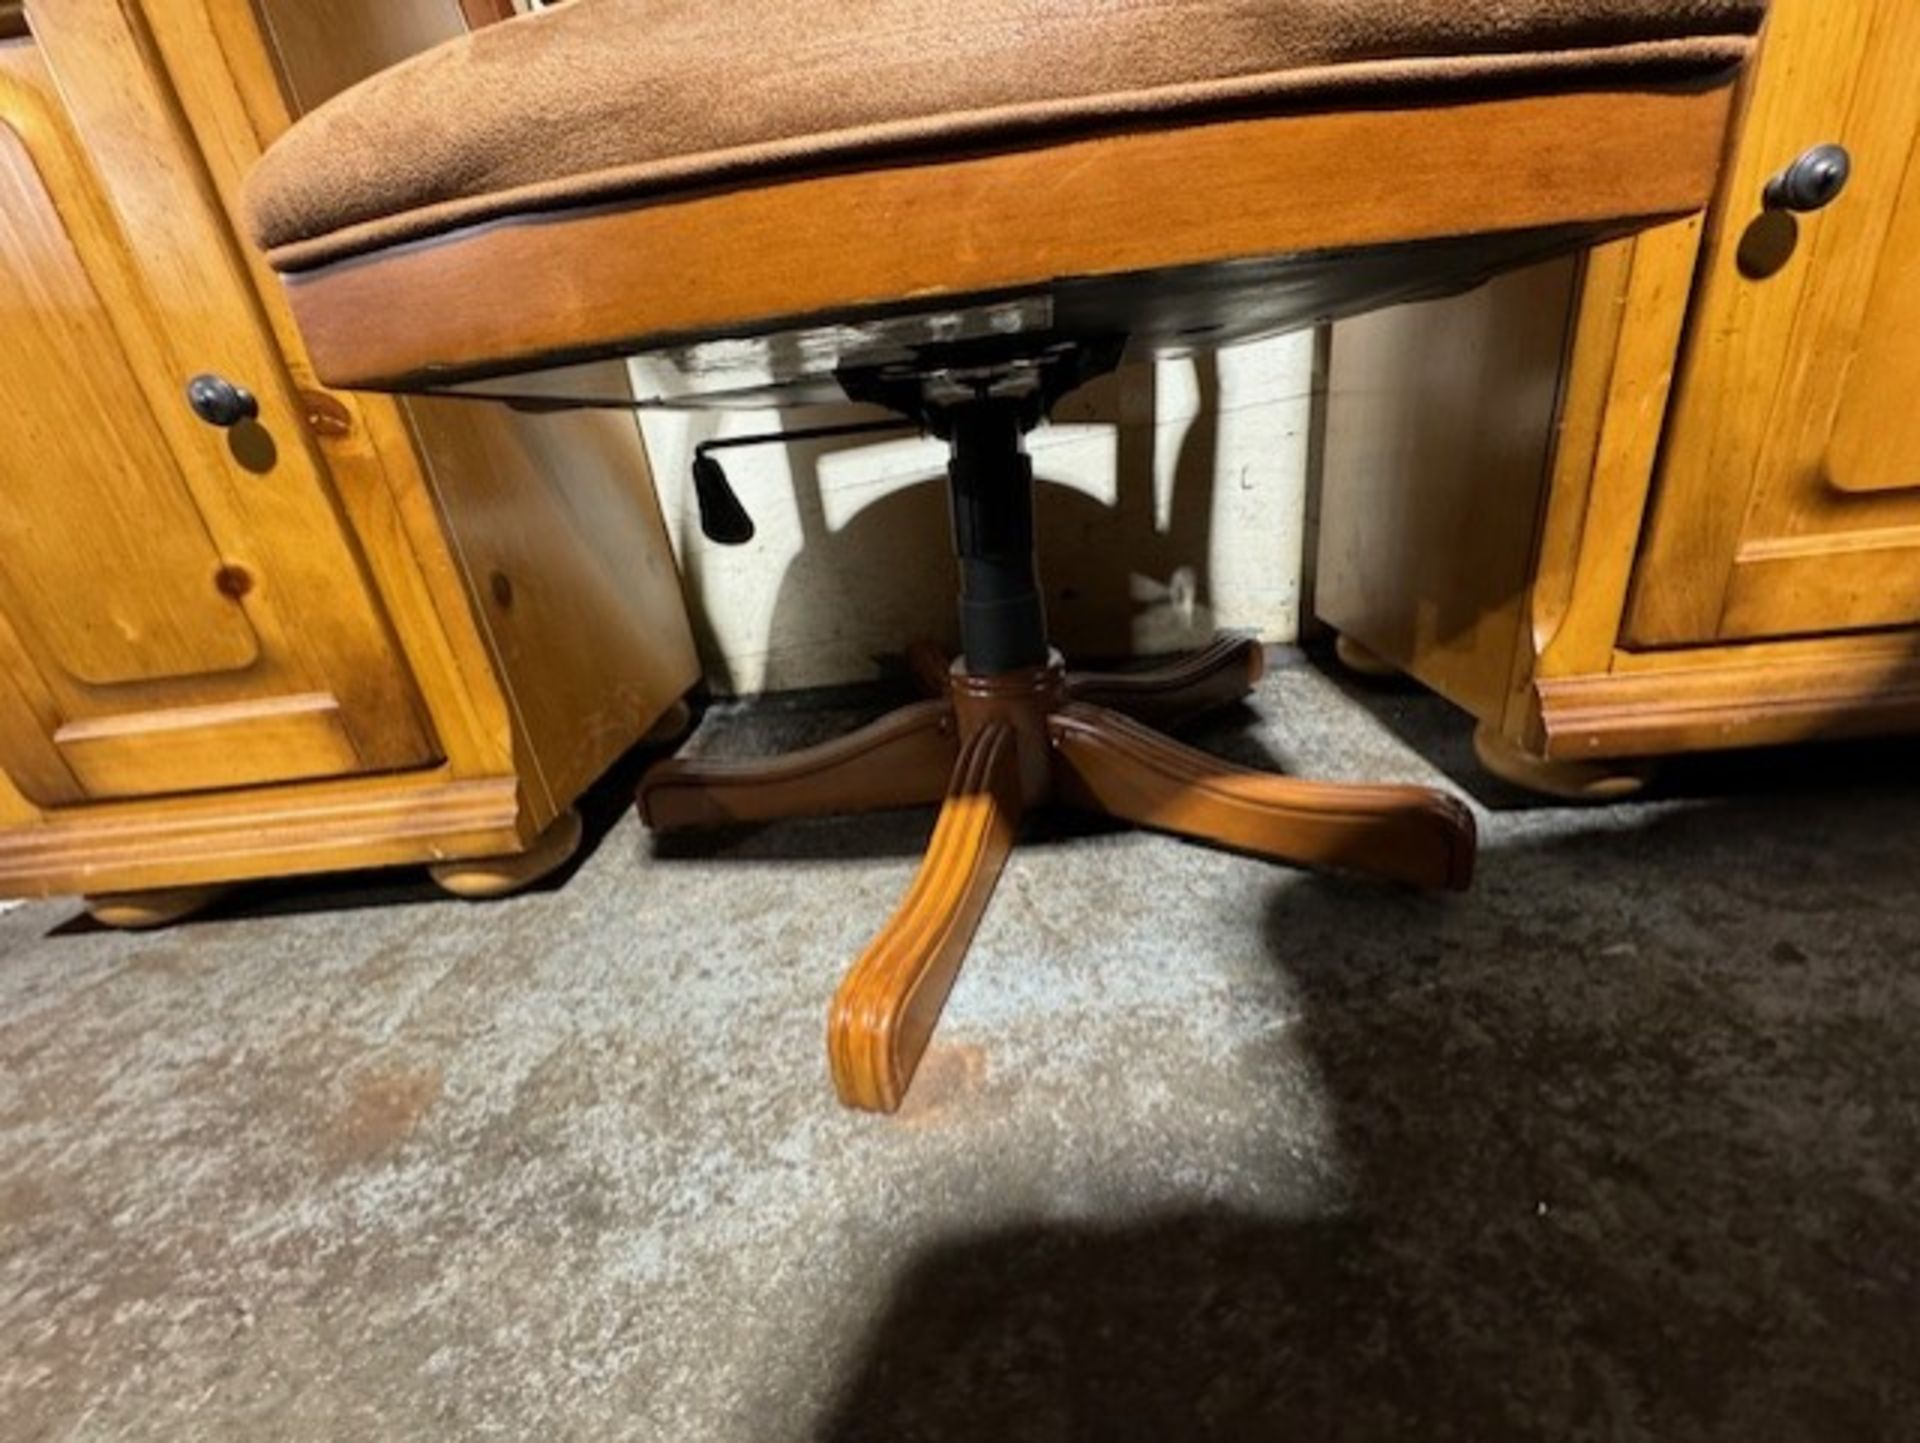 MAHOGANY ADJUSTABLE HEIGHT DESK CHAIR WITH BROWN SUEDE SEAT AND BACK (NEEDS CASTERS) - Image 2 of 2